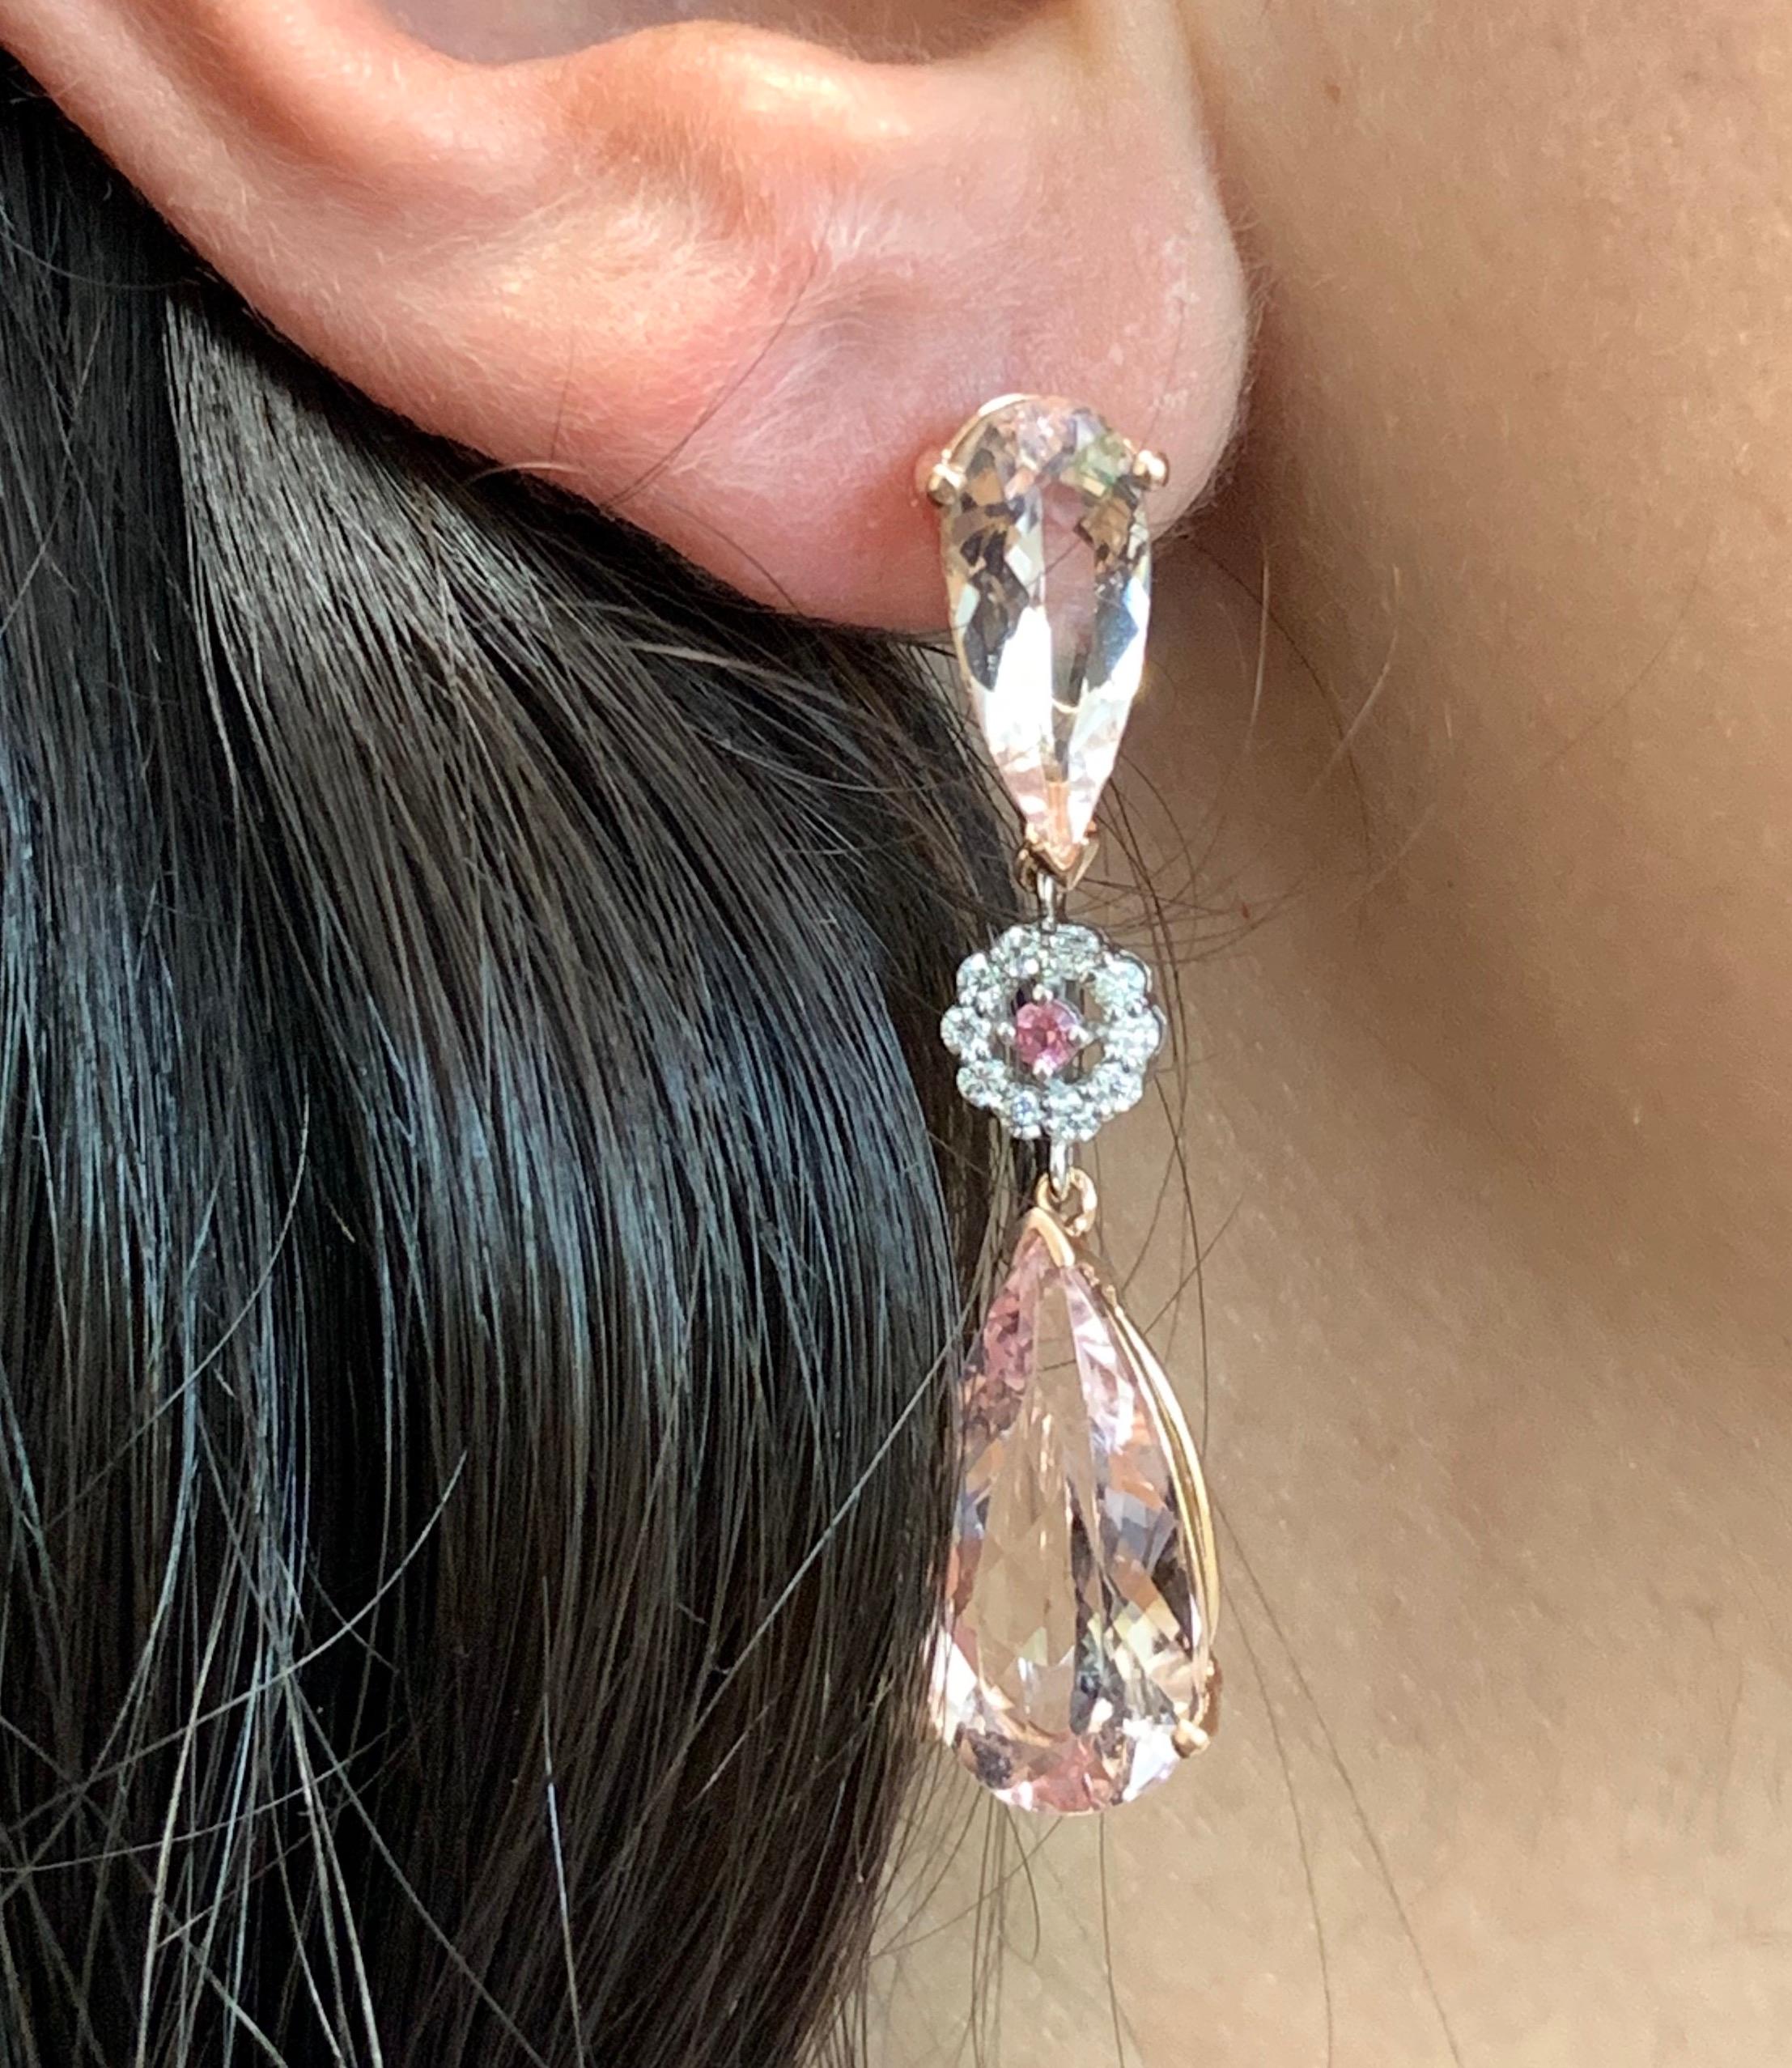 Material: 14k Two Tone
Center Stone Details: 4 Pear Shaped Pink Morganites at 12.10 carats  
Stone Details: 2 Pink Tourmalines at 0.06 Carats
Diamond Details: 20 Round White Diamonds at 0.23 Carats - Clarity: SI / Color: H-I

Fine one-of-a-kind